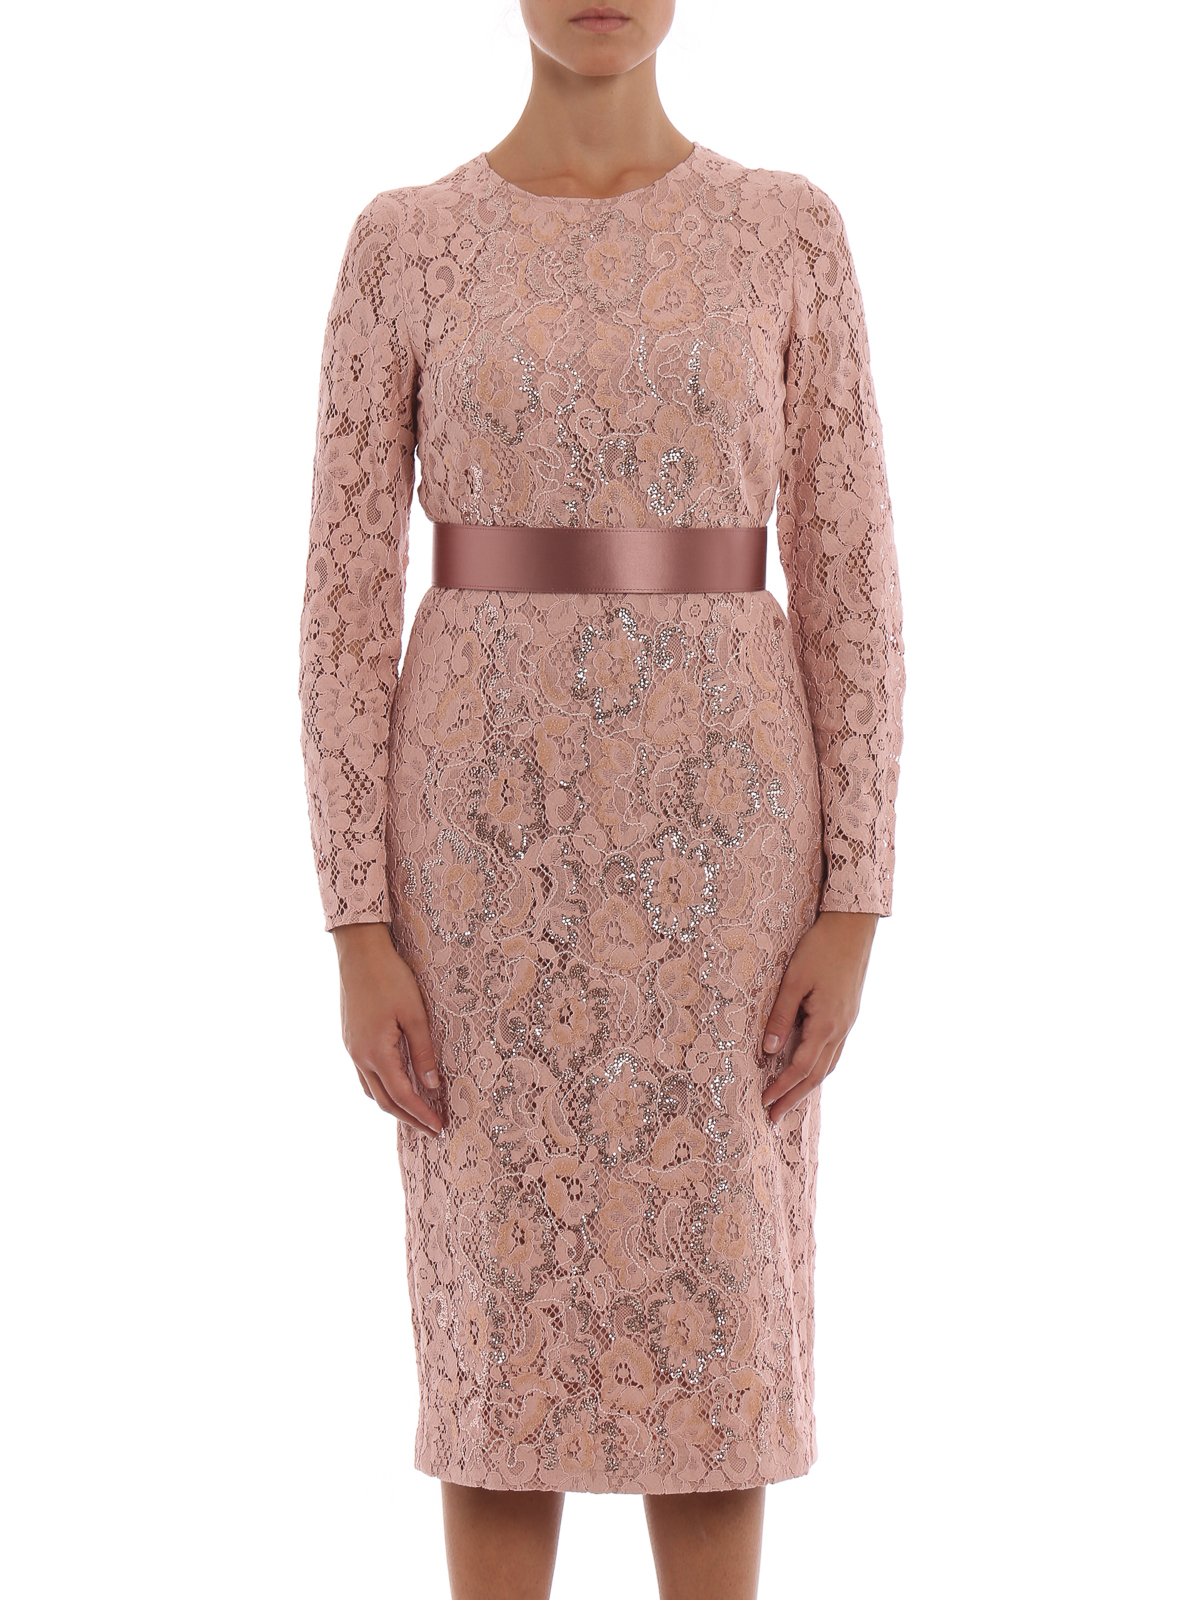 Max Mara Lace Dress Top Sellers, UP TO ...